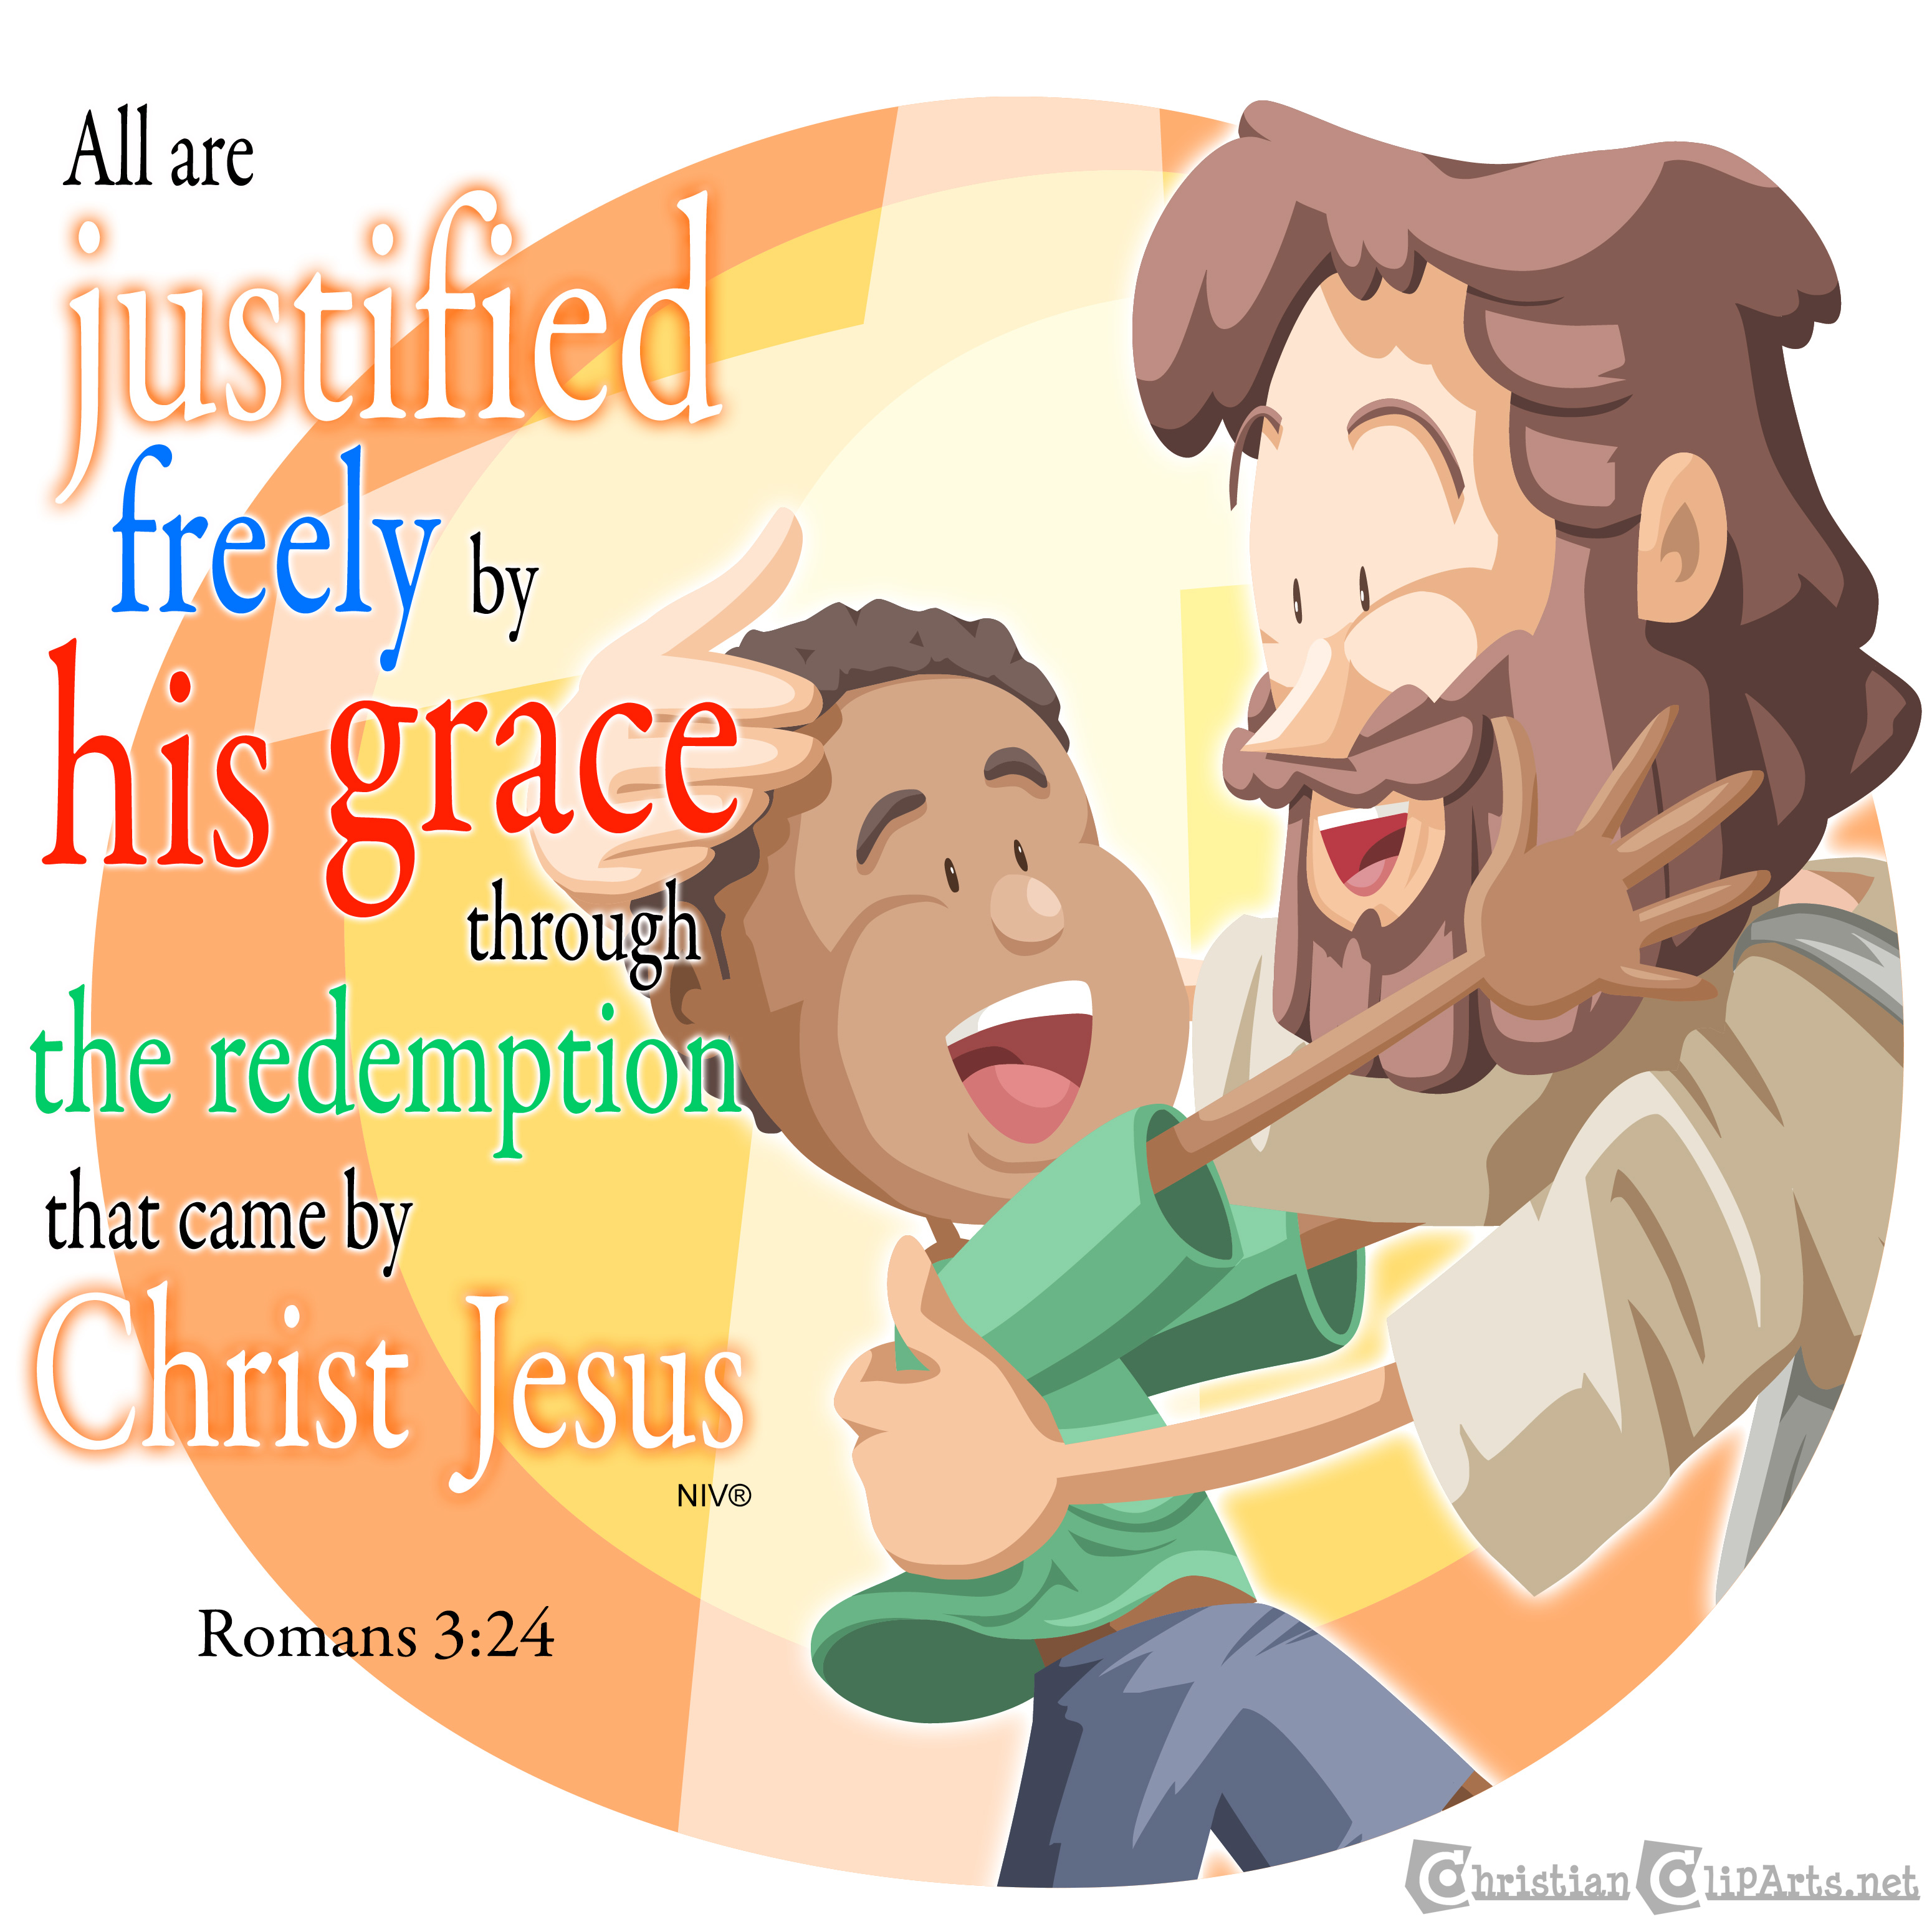 Justified freely by his grace